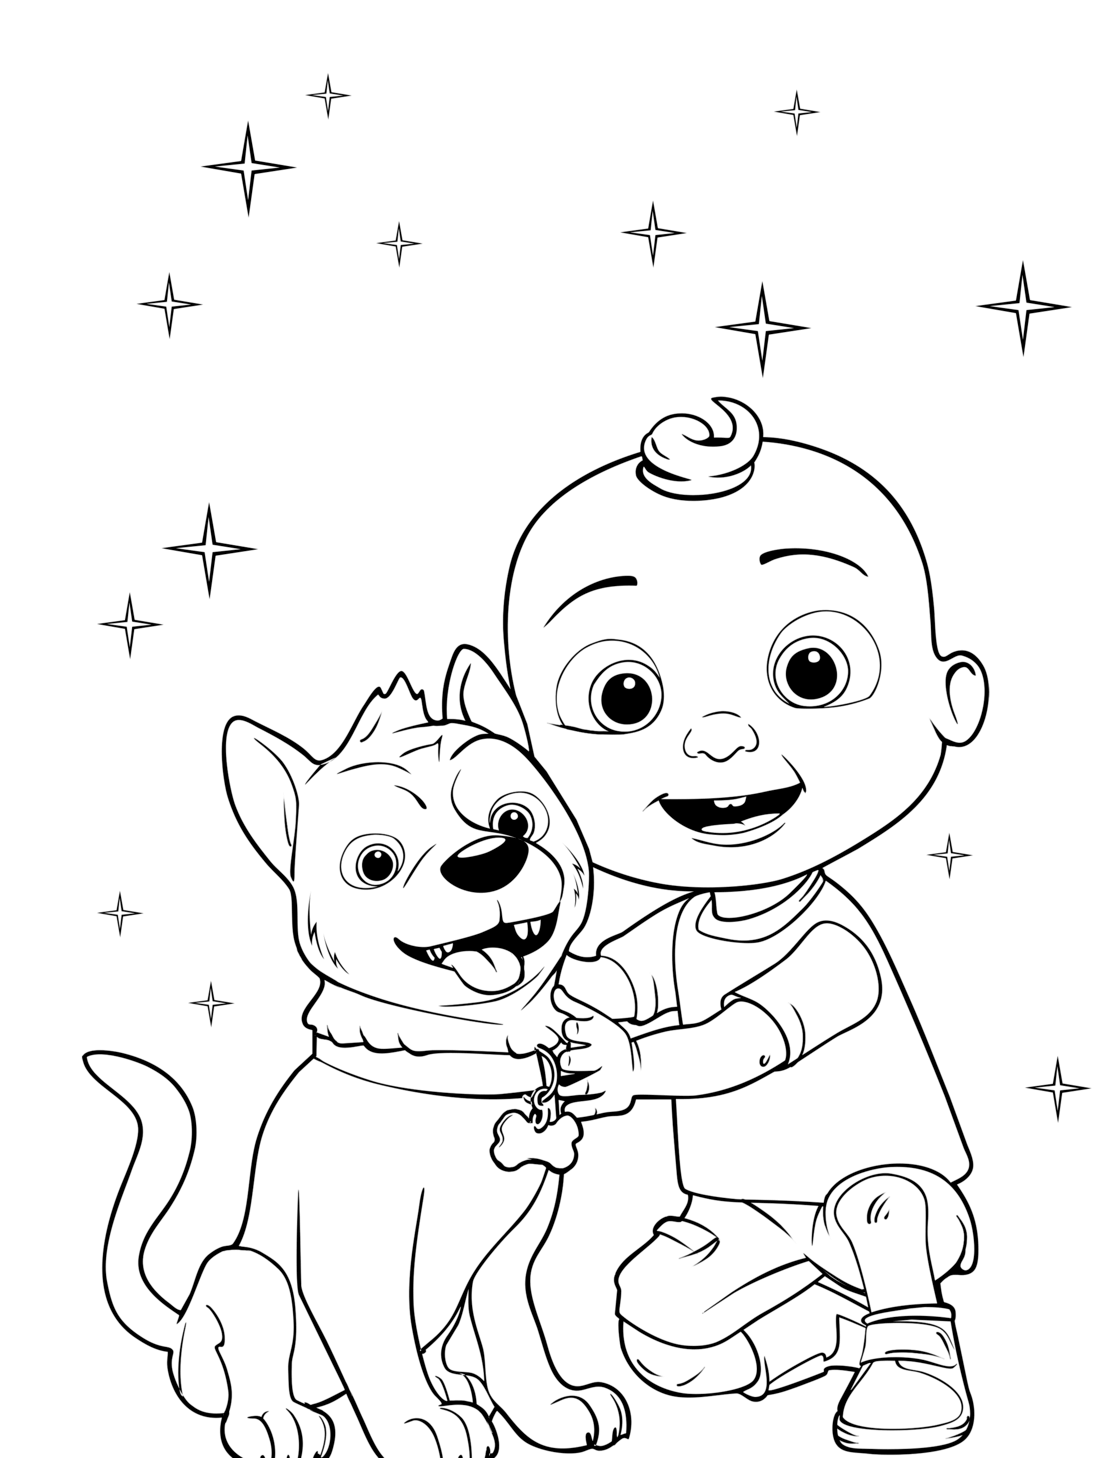 Cocomelon Coloring Pages - Coloring Cool